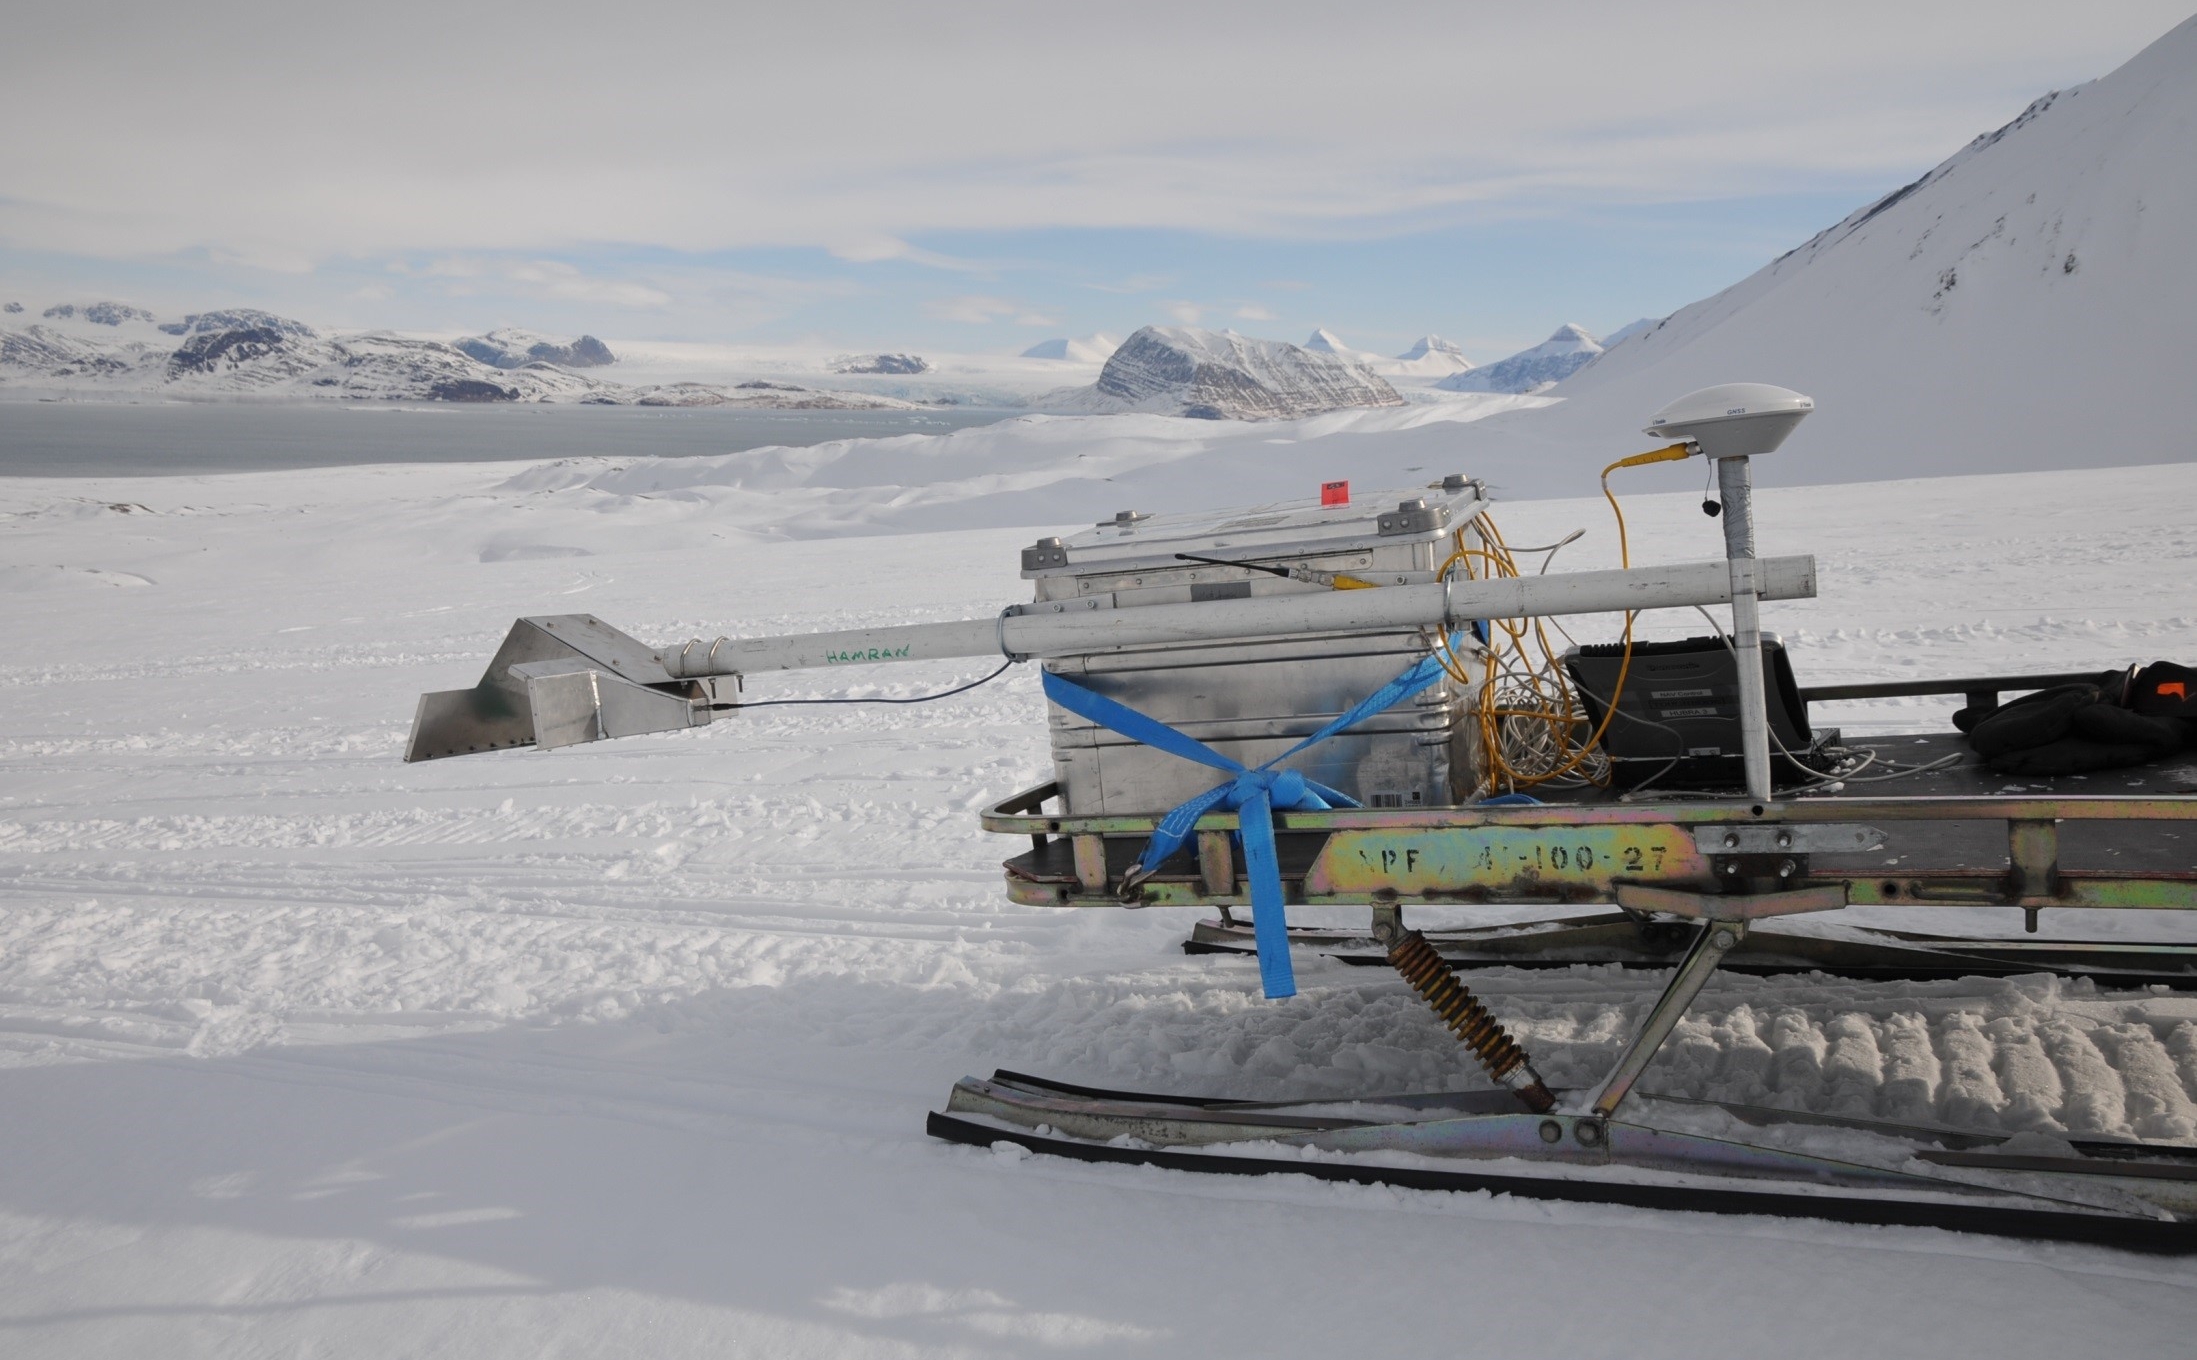 Photograph showing the prototype RIMFAX antenna attached to a snowmobile during tests in Svalbard, Norway.